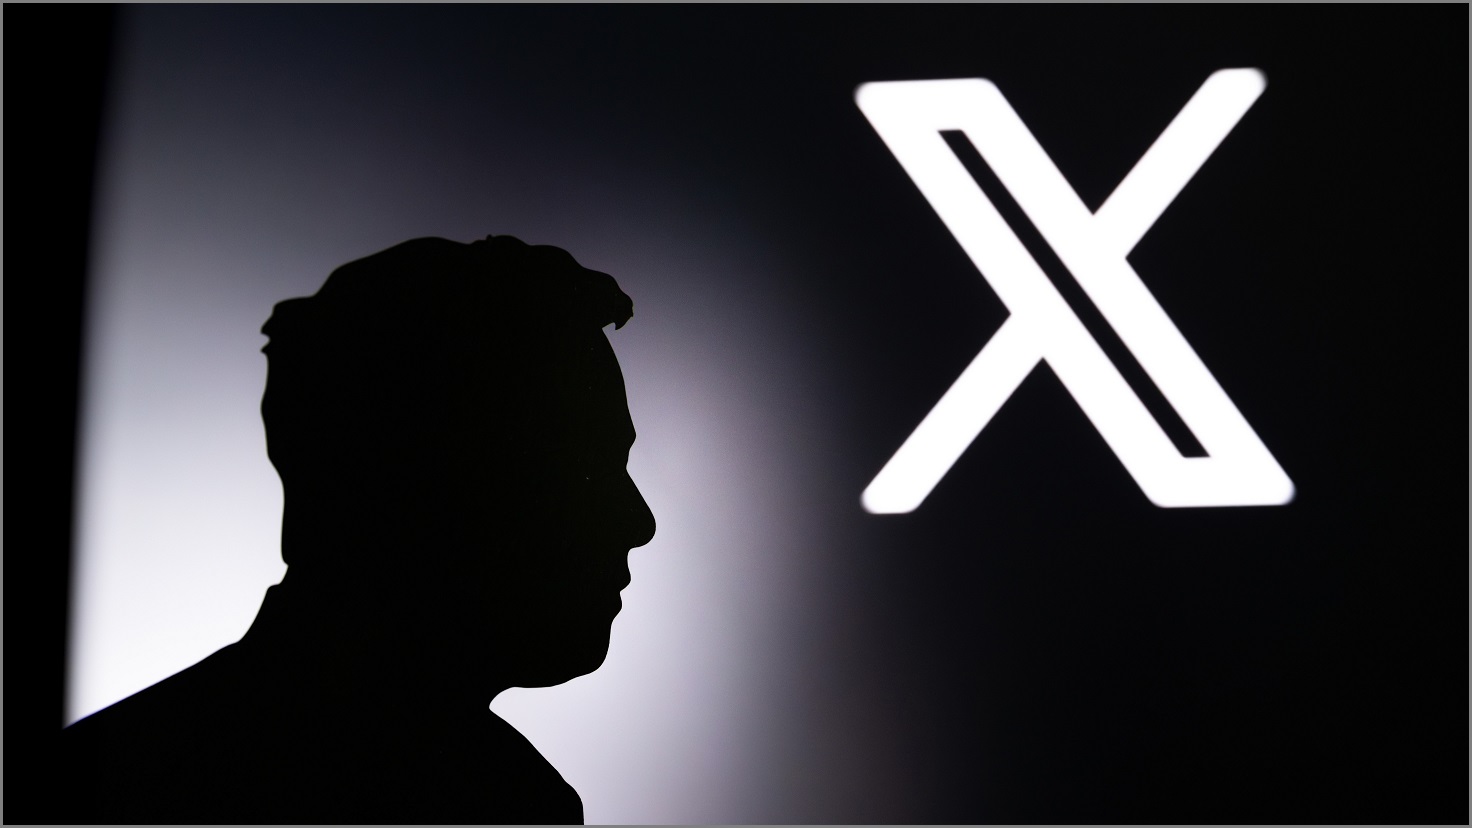 Elon Musk and the X symbol